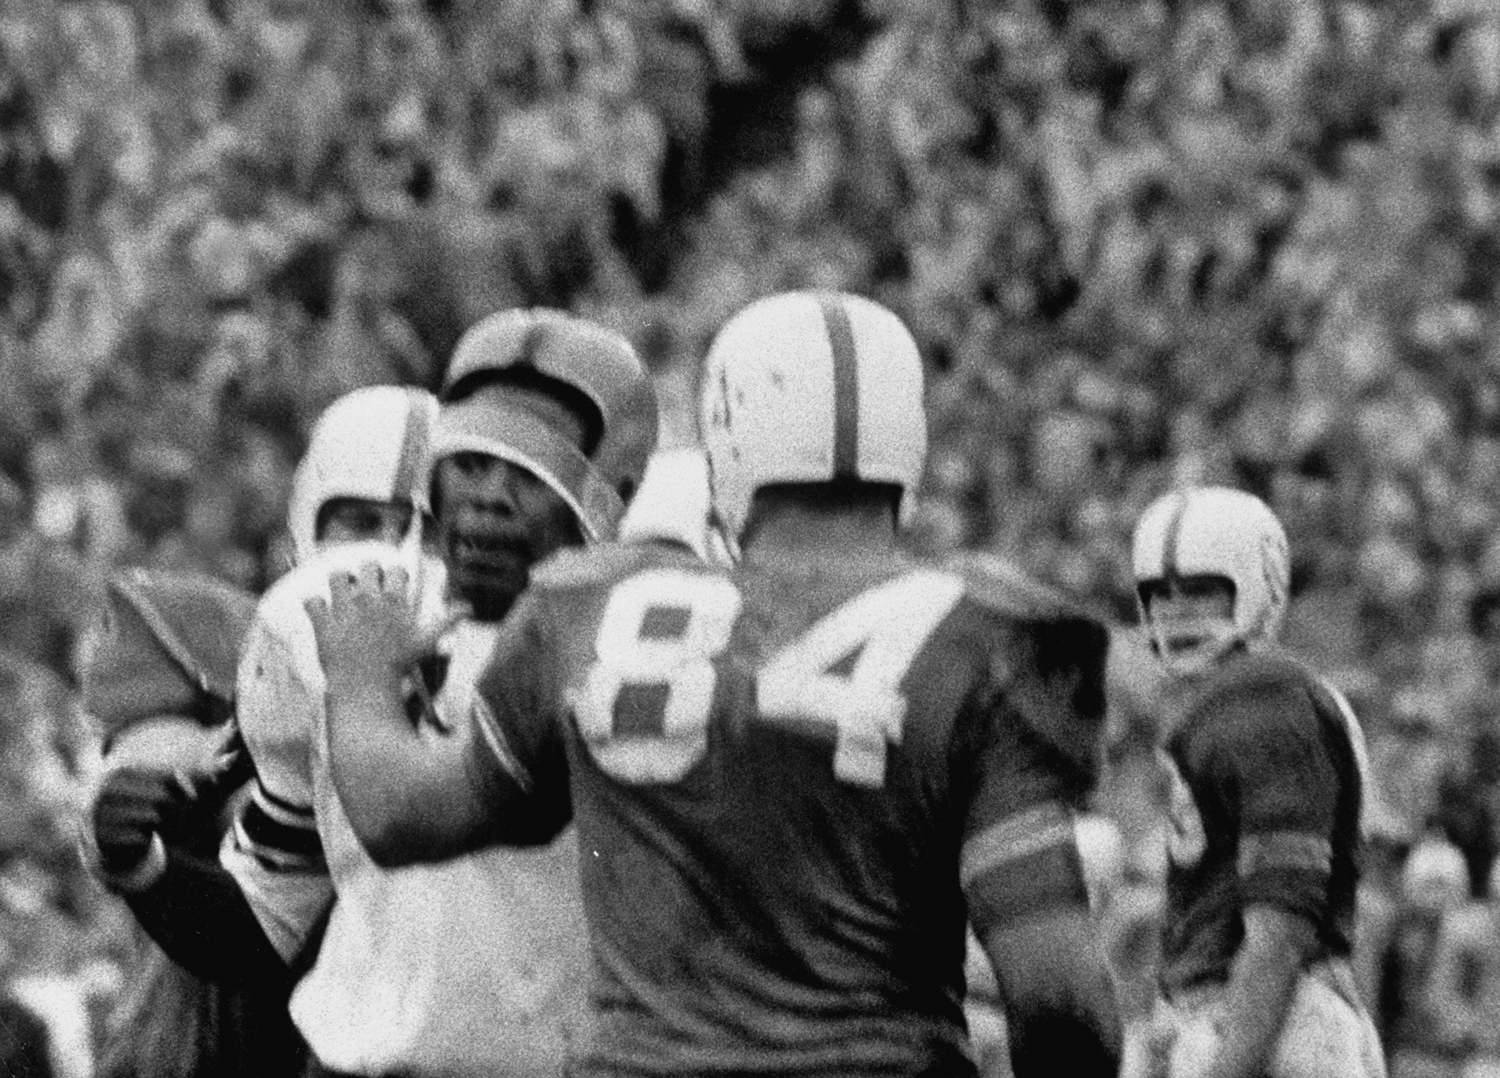 Syracuse player John Brown (in white jersey) in fight over alleged racial insult from Texas player Larry Stephens during 1960 Cotton Bowl.